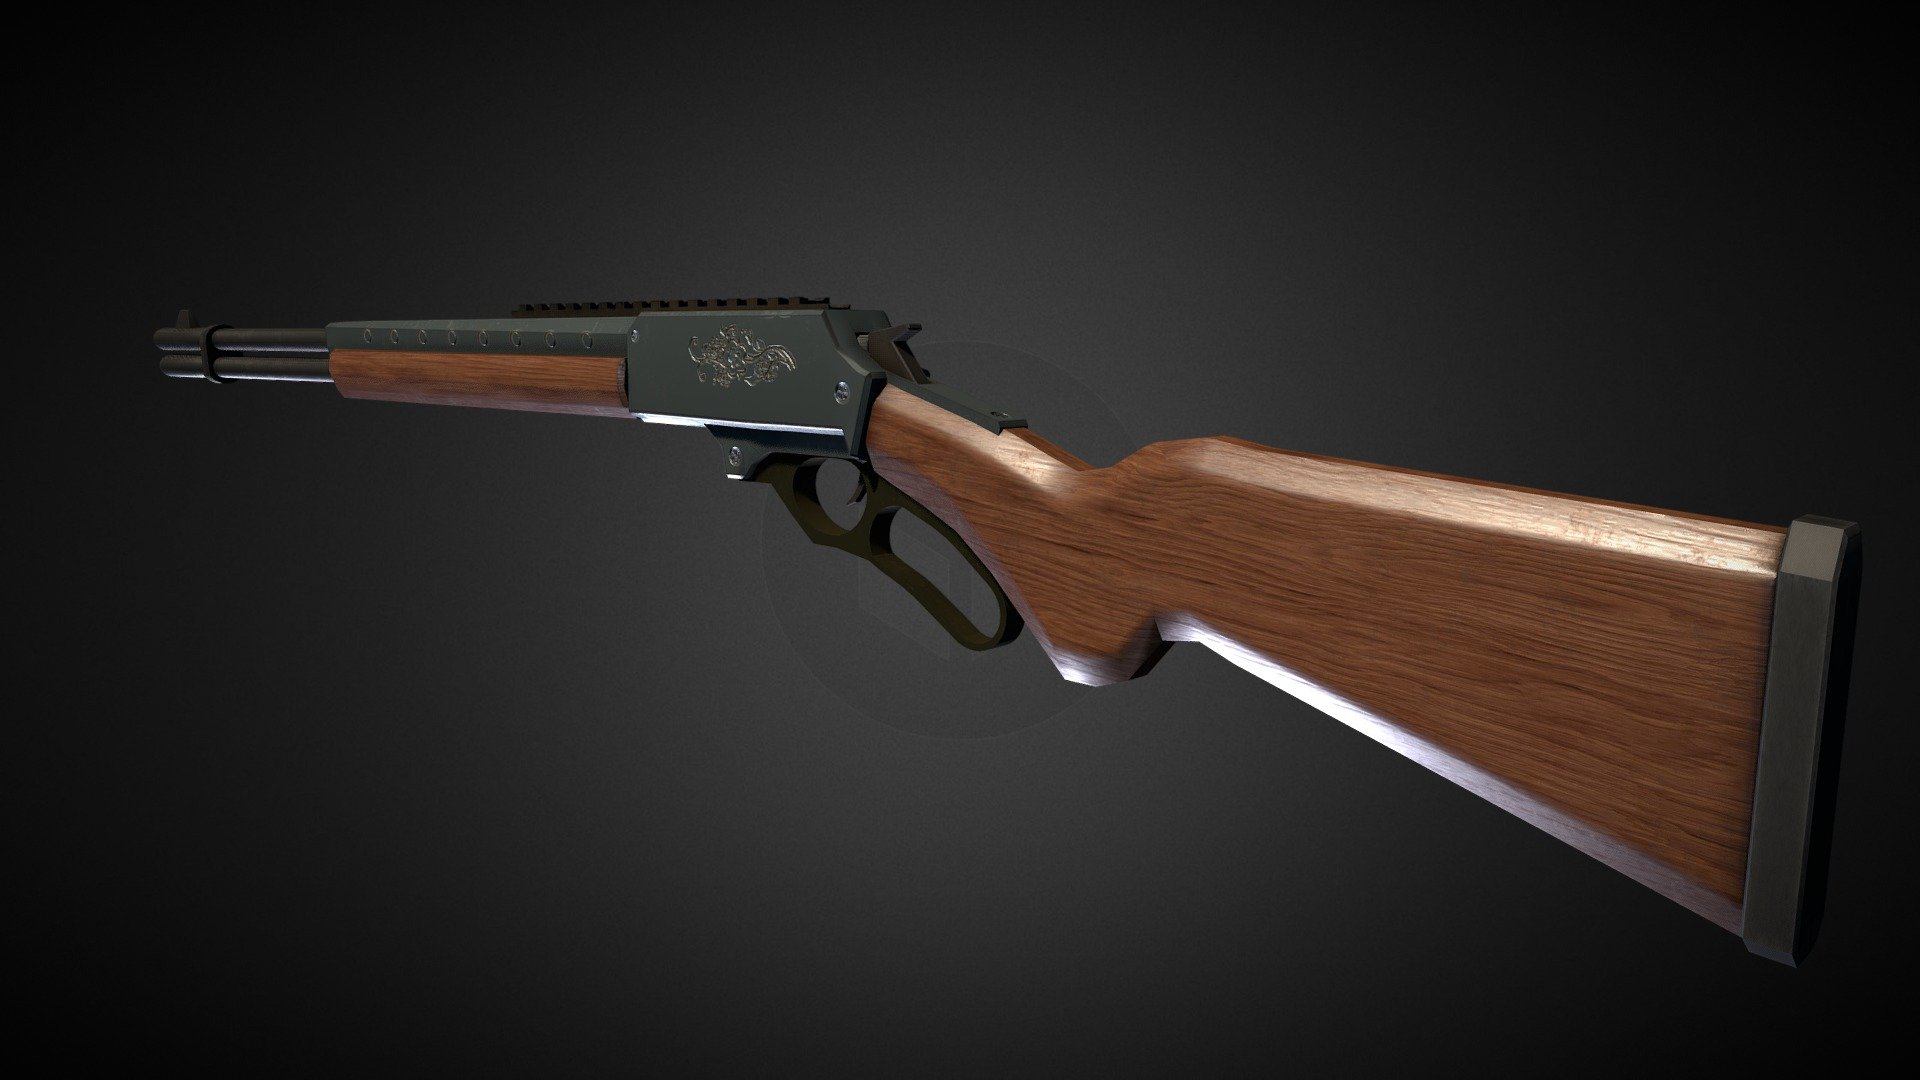 loosely based off the Marlin 366 guns.  Made with Blender and Substance Painter.  Perfect Detail for First Person and Third person Shooter games 3d model